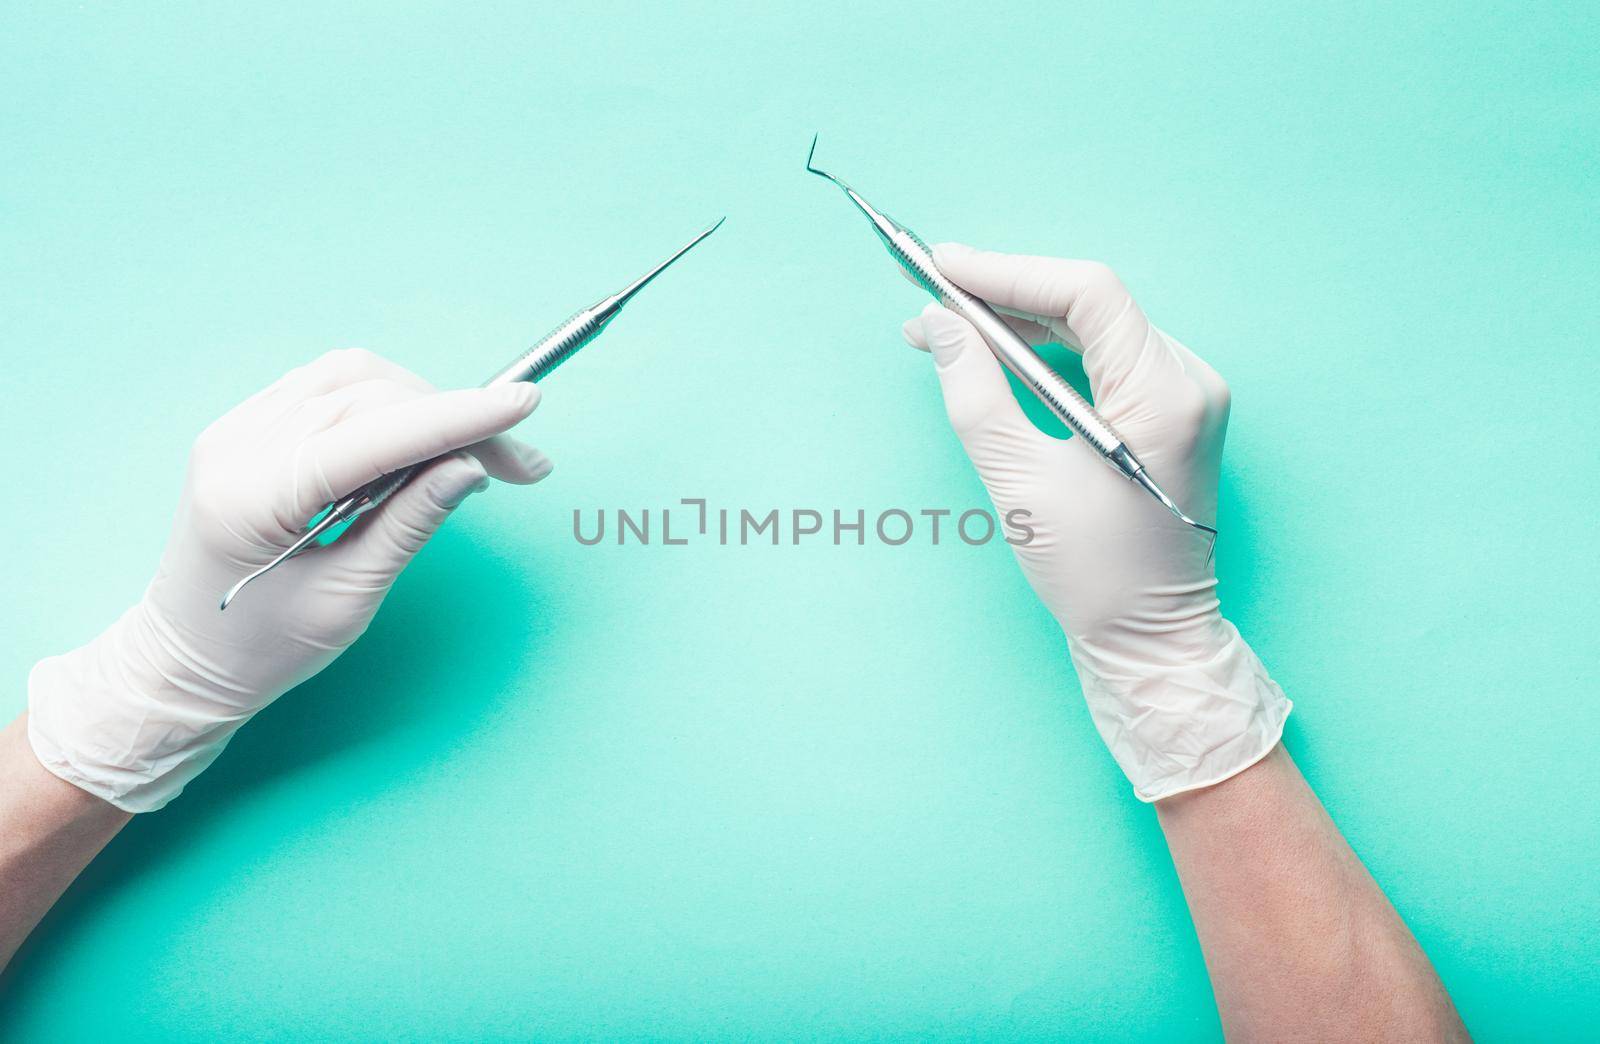 Top view of hands holding dental tools on light turquoise background